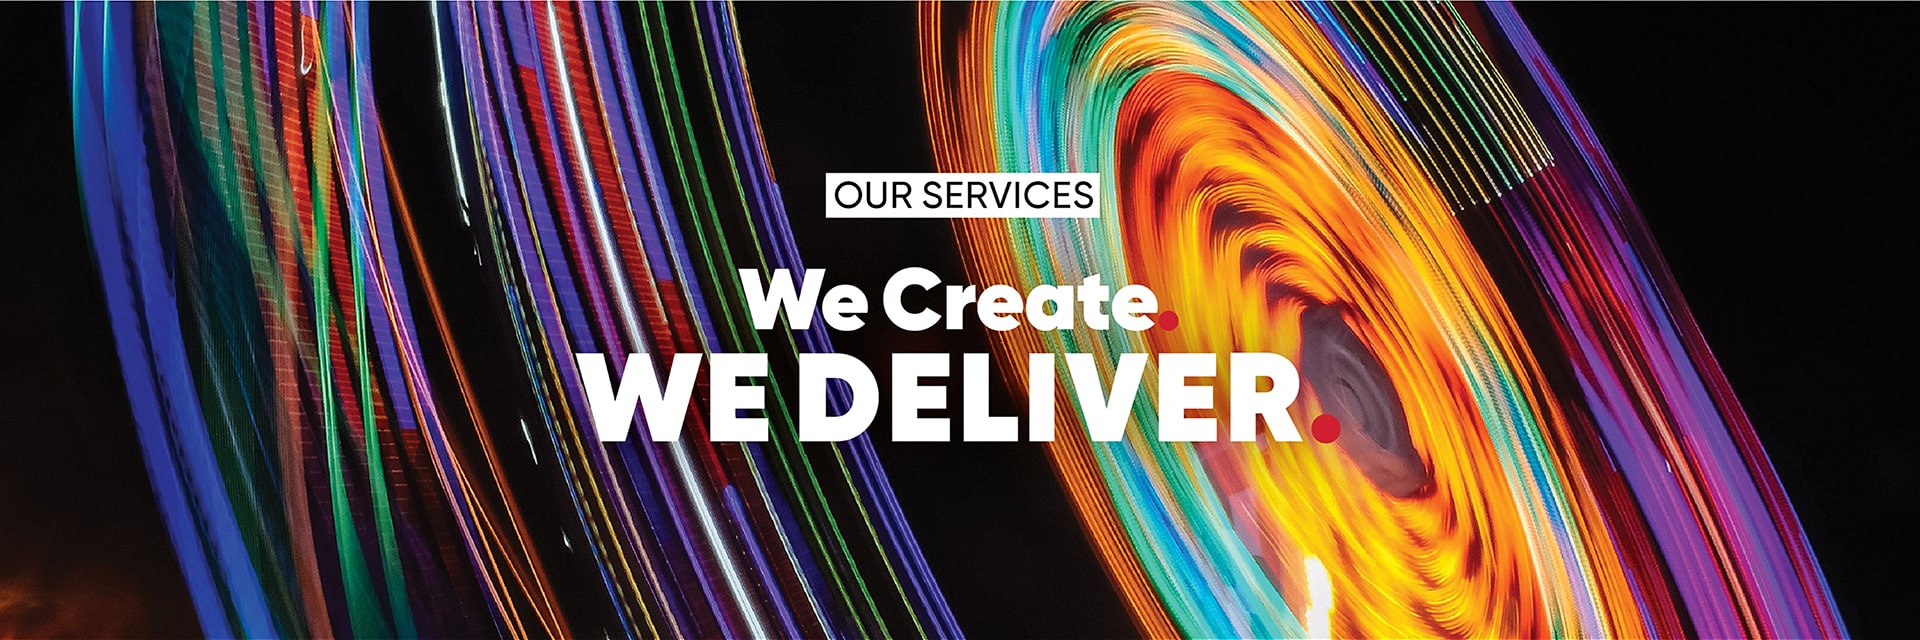 About - We Deliver